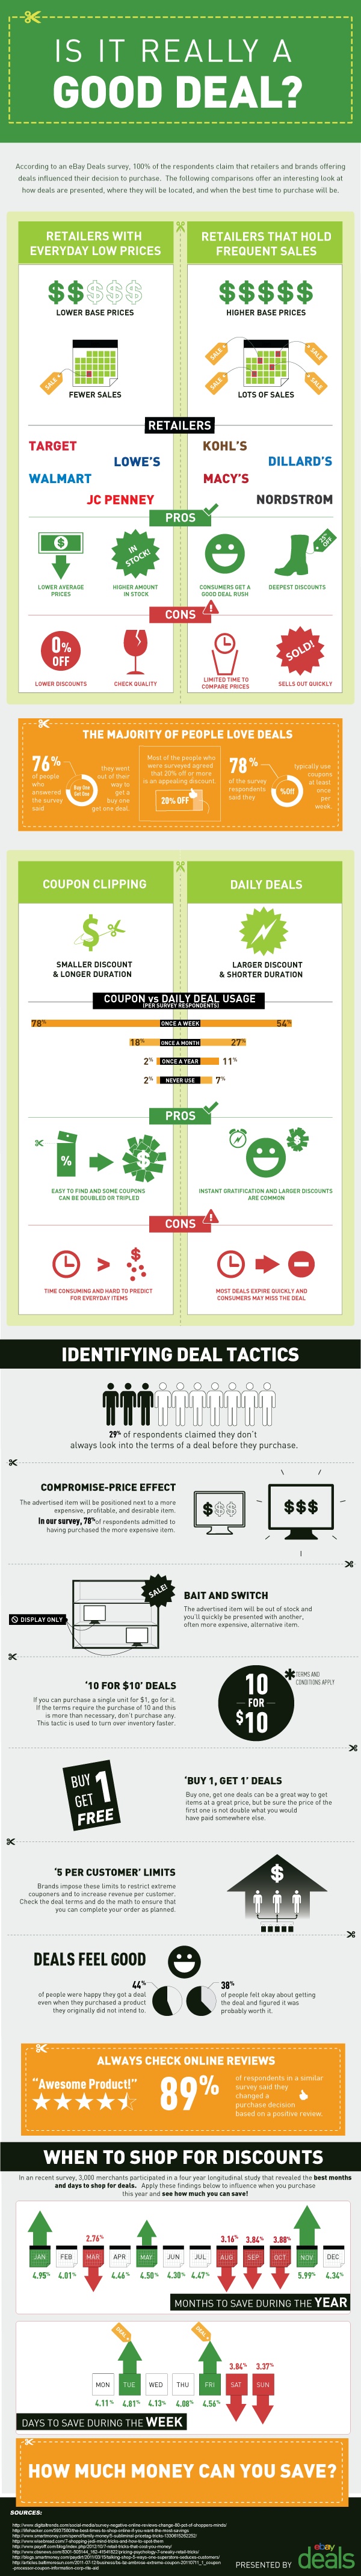 IsItAGoodDeal  ebay infographic